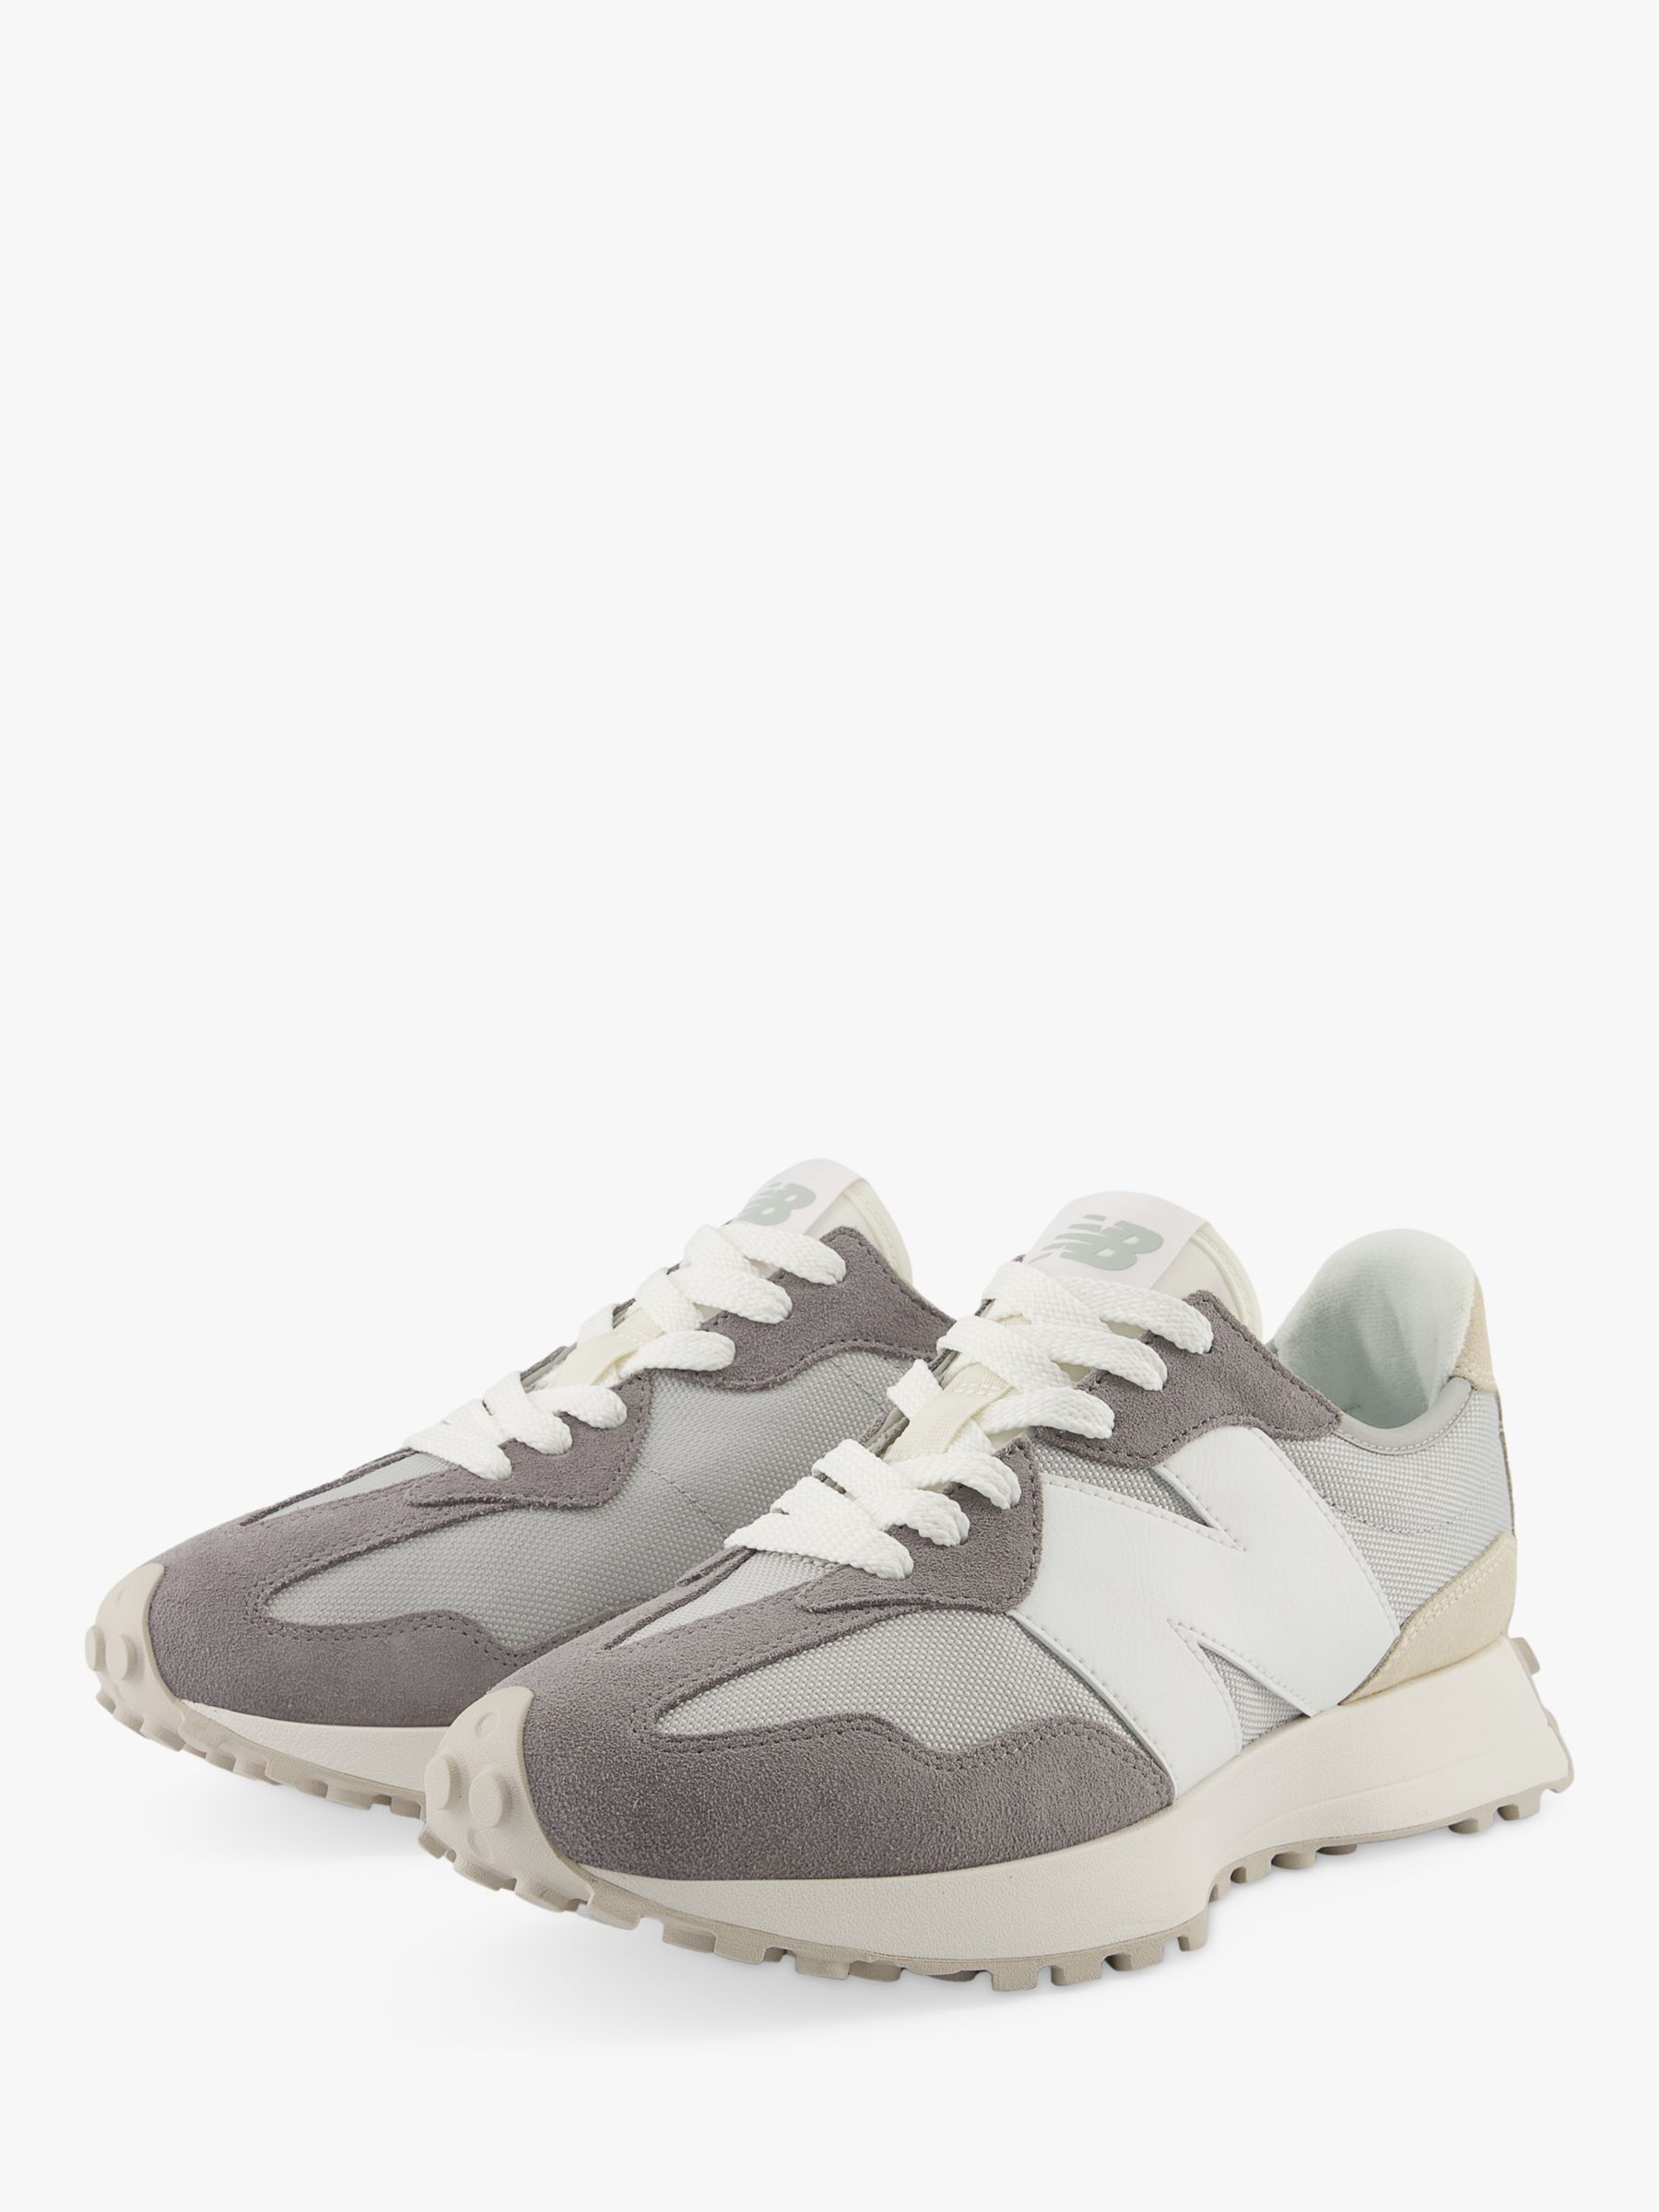 Buy New Balance 327 Classic Suede Mesh Trainers Online at johnlewis.com